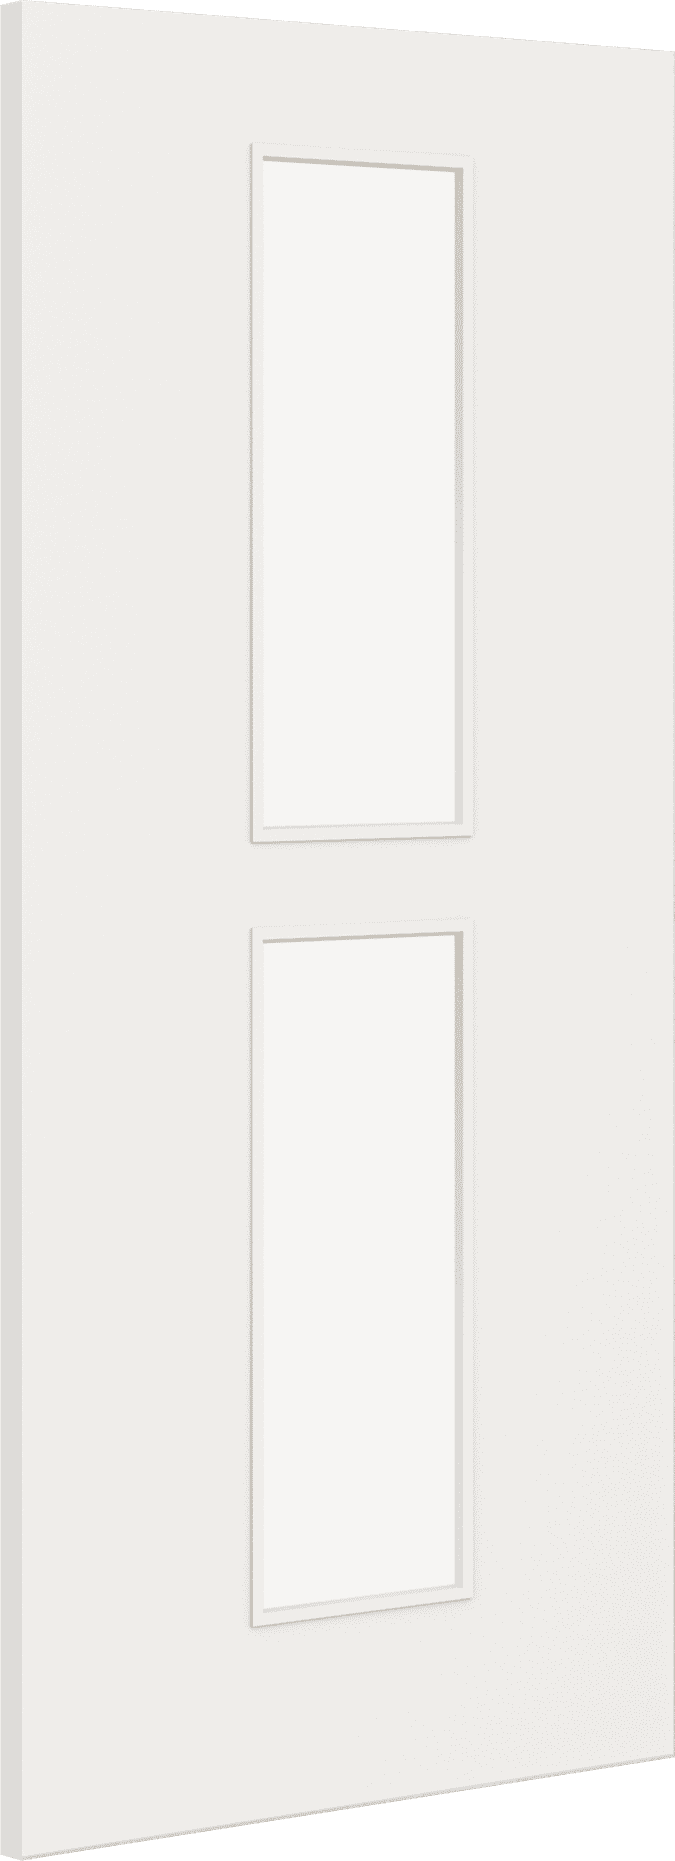 2040mm x 726mm x 44mm Architectural Paint Grade White 12 Frosted Glazed Fire Door Blank